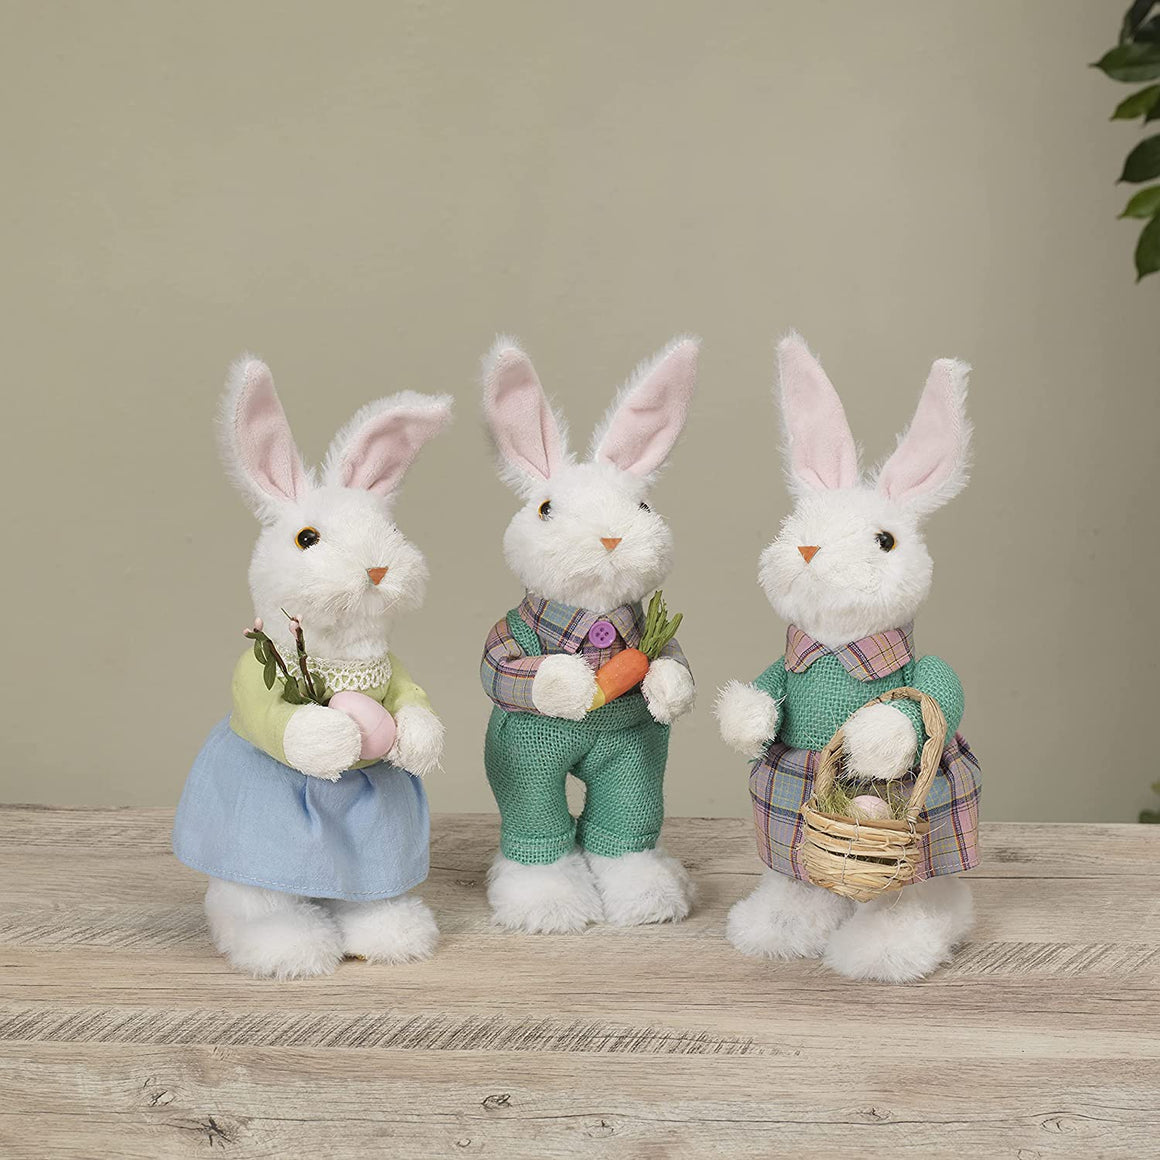 Set of 3 White Easter Rabbits Dressed for Spring, 11 Inches High, Soft Fur and Detailed Clothing, Easter Rabbit Décor